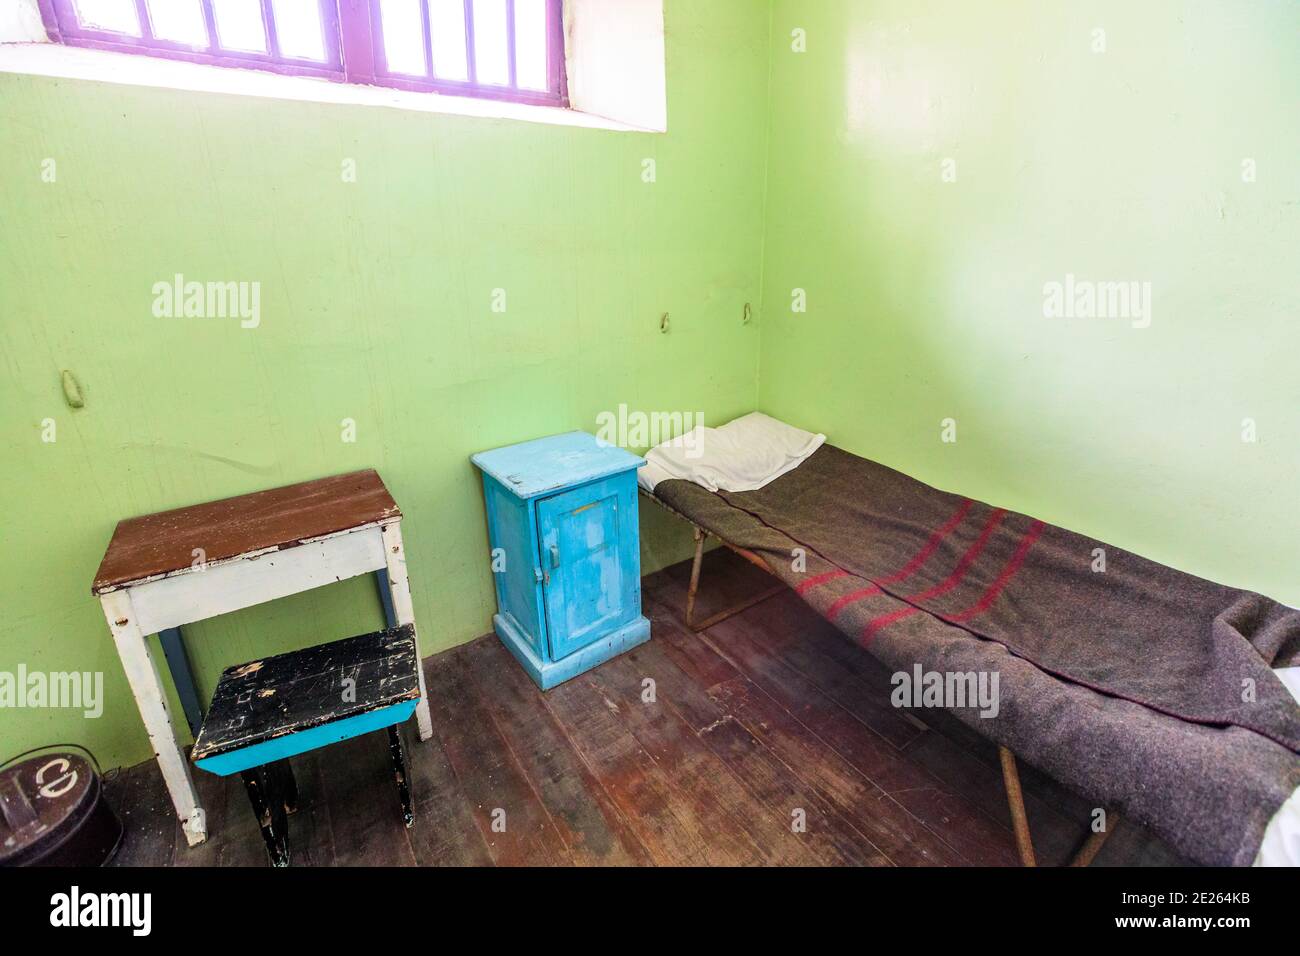 Fremantle, Western Australia - Jan 5, 2018: single cell with bed and bedside table of Fremantle Prison an old convicts jail built in 1855. Memorial Stock Photo